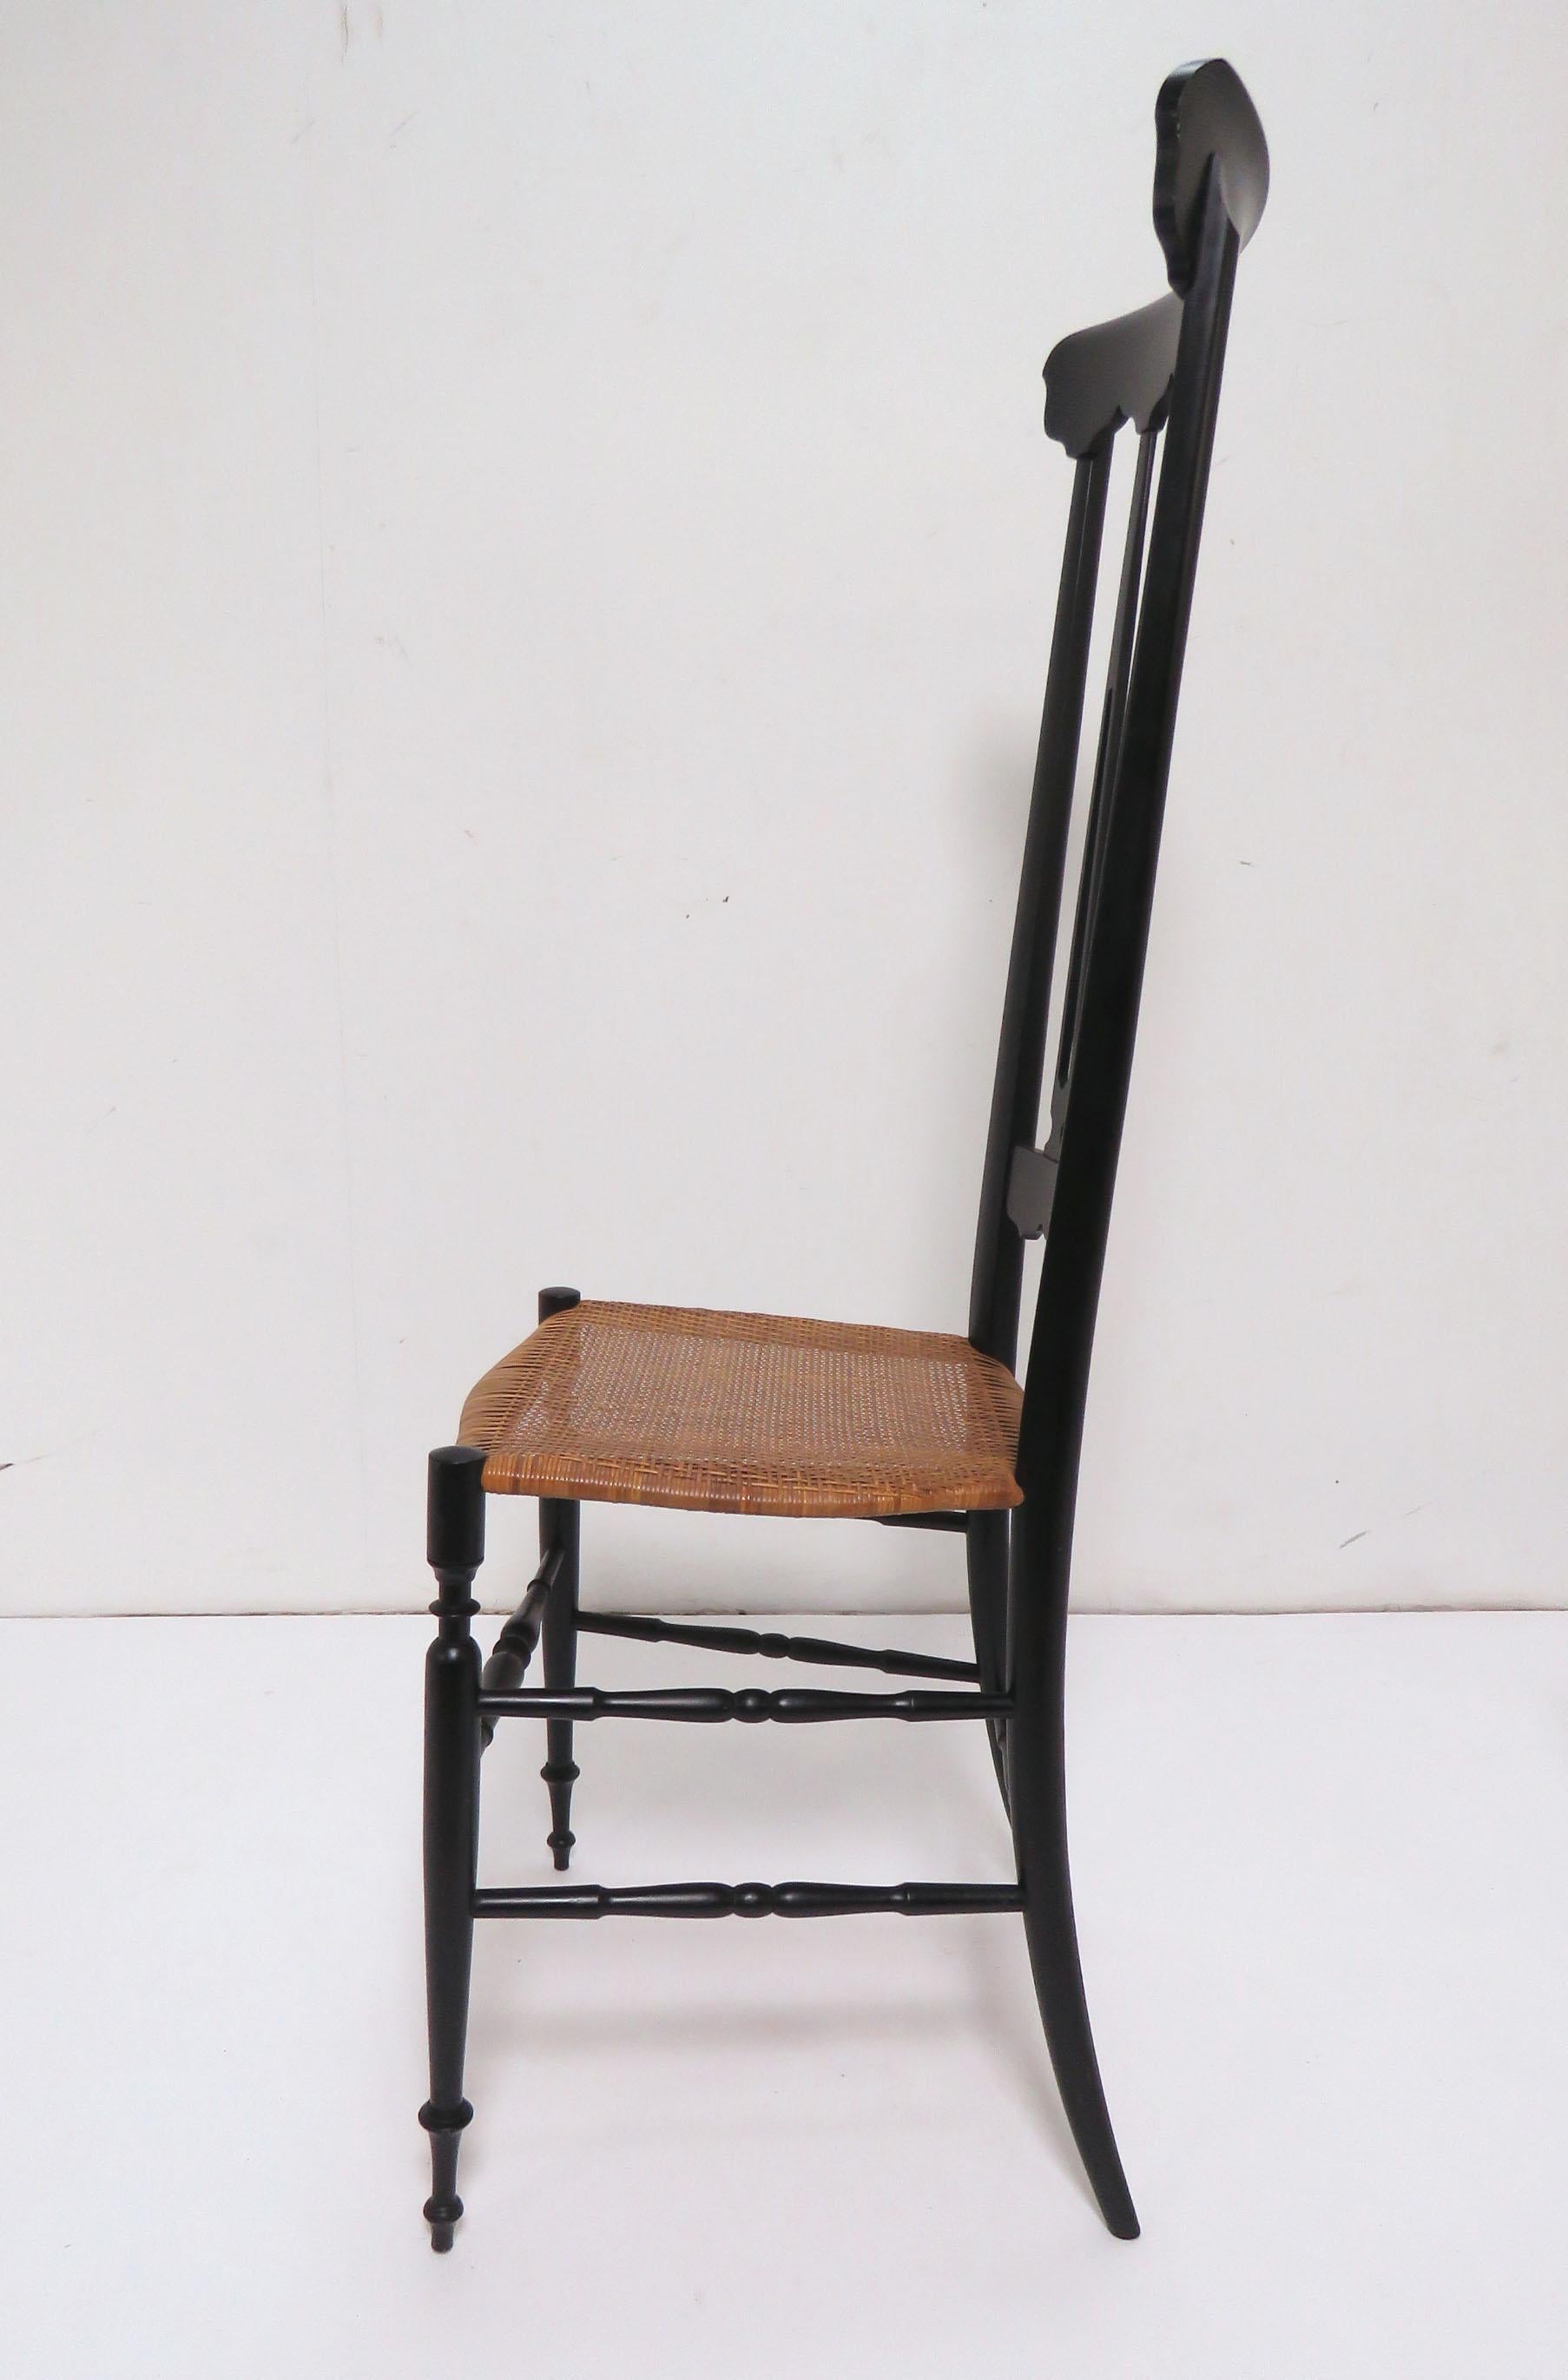 Lacquered Pair of Chiavari High Back Chairs in Black Lacquer and Cane, circa 1960s